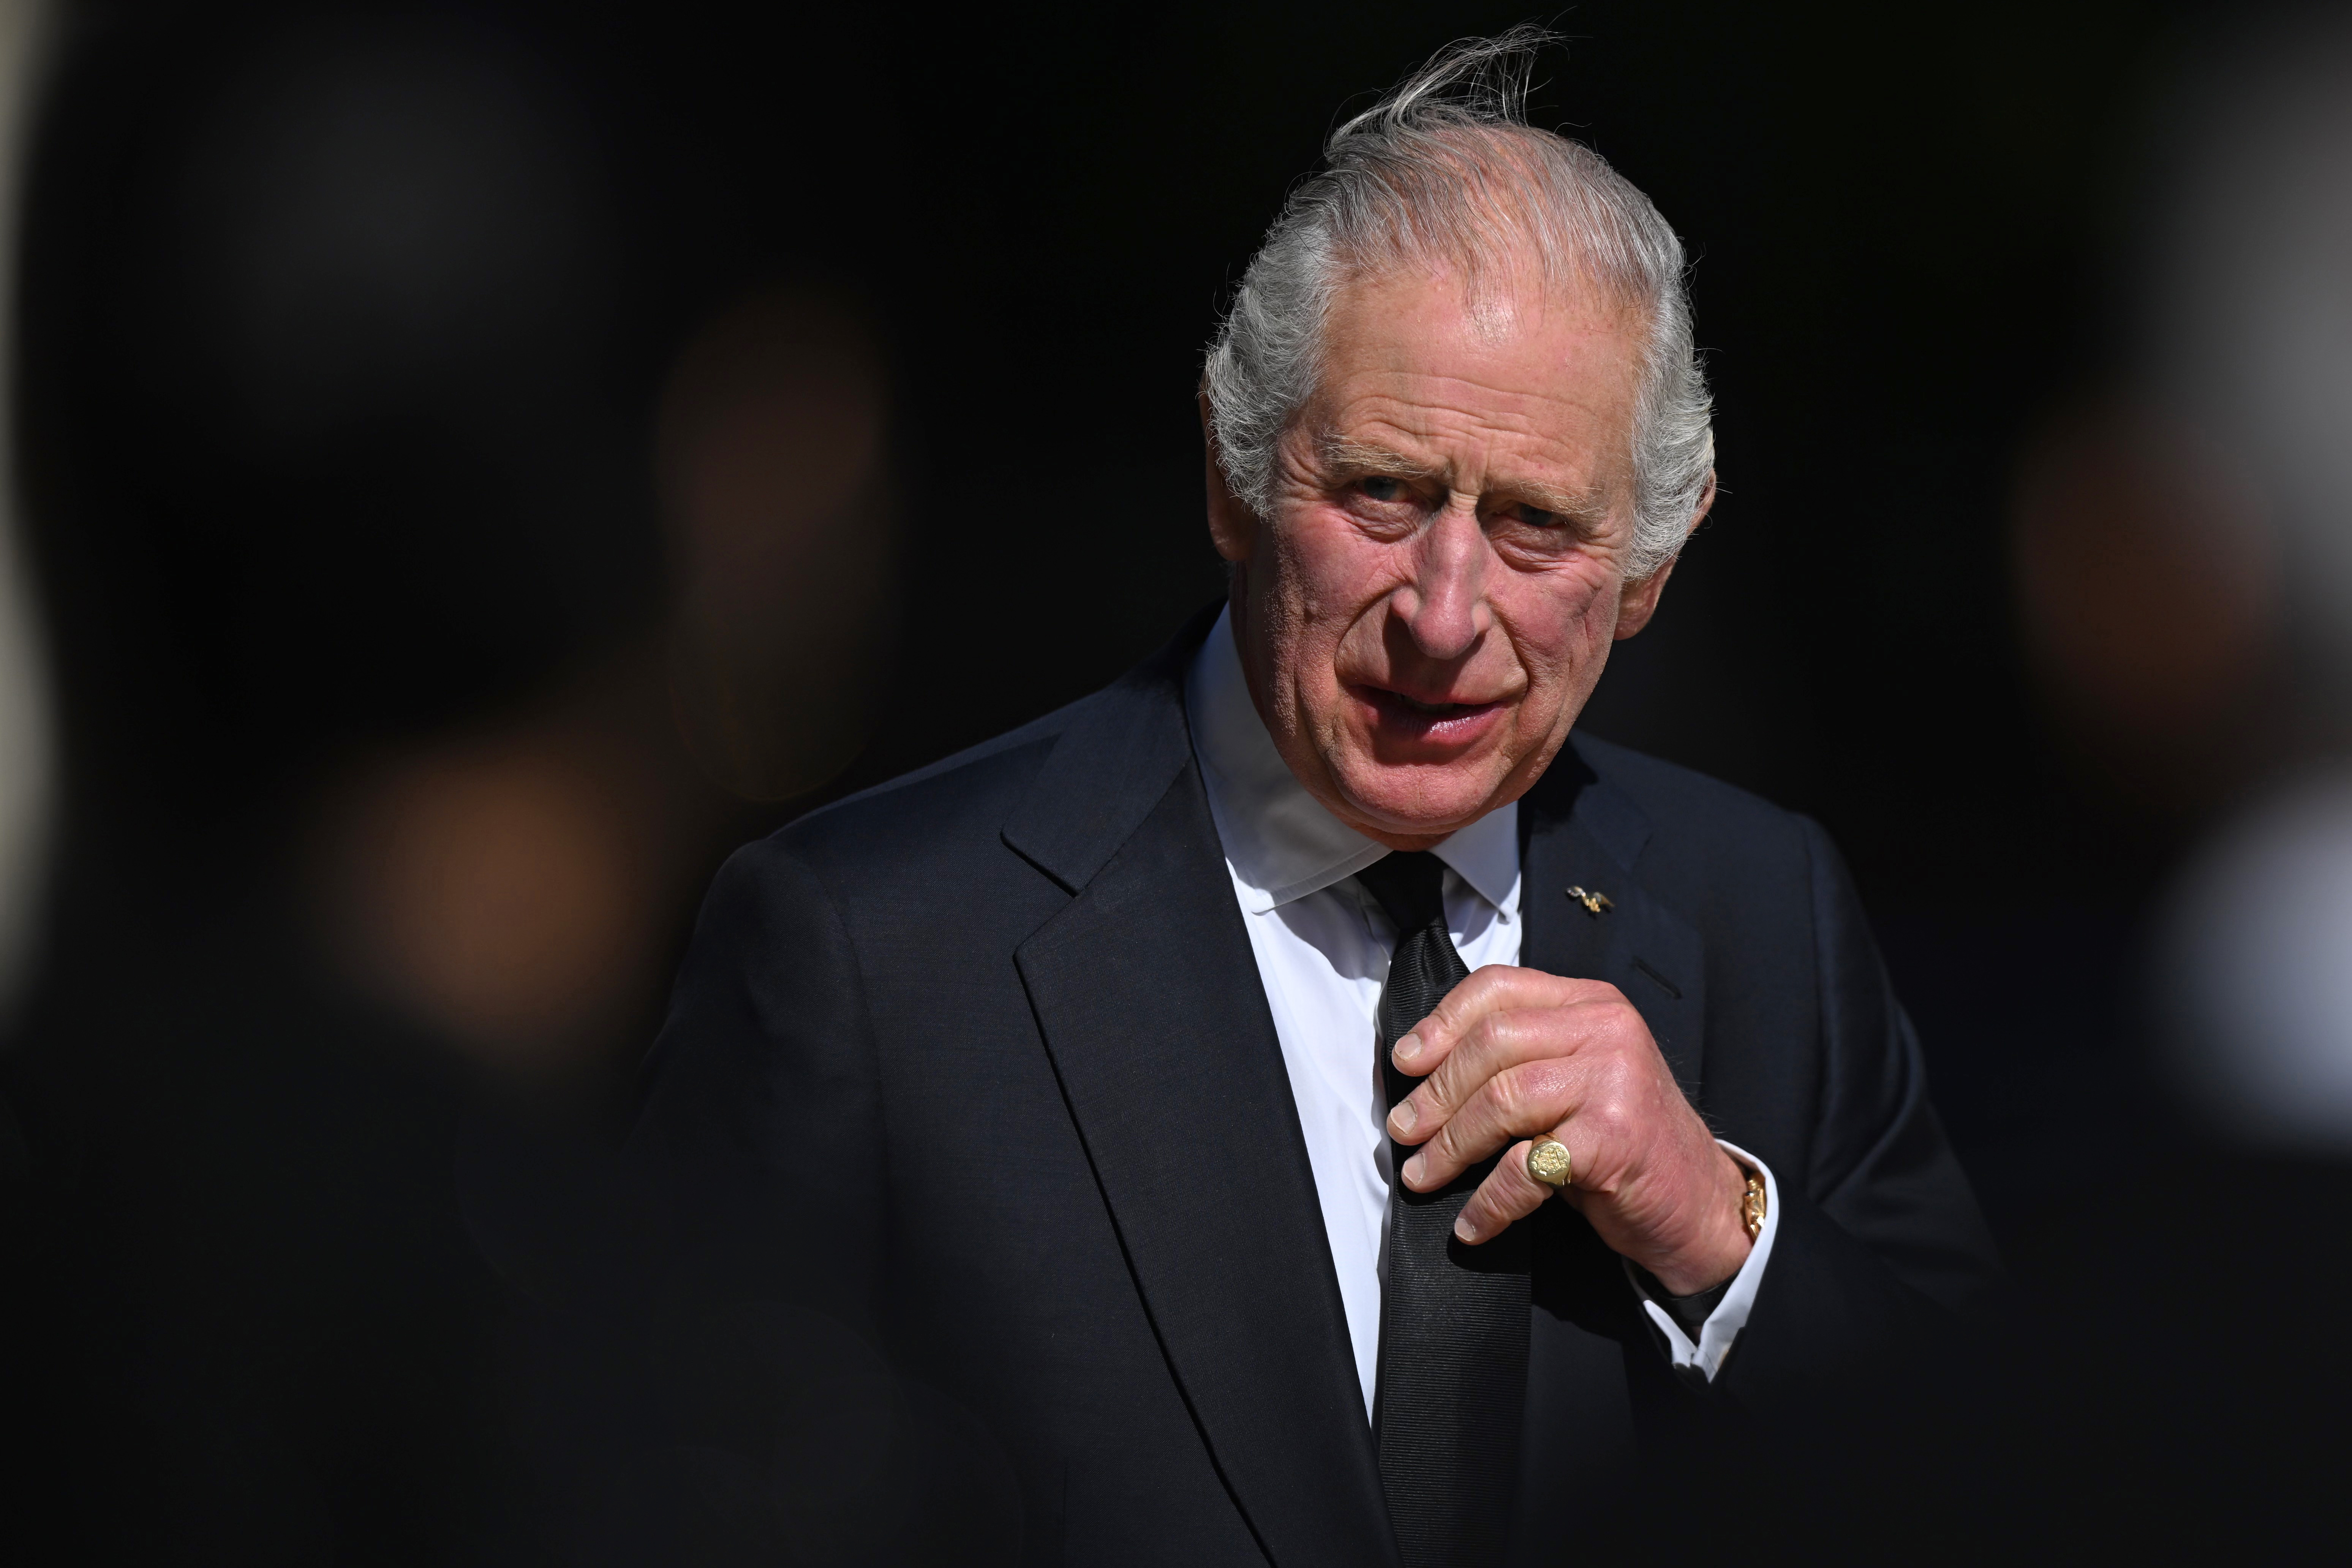 King Charles III arriving to meet emergency service workers at Lambeth HQ on September 17, 2022 in London, England | Source: Getty Images